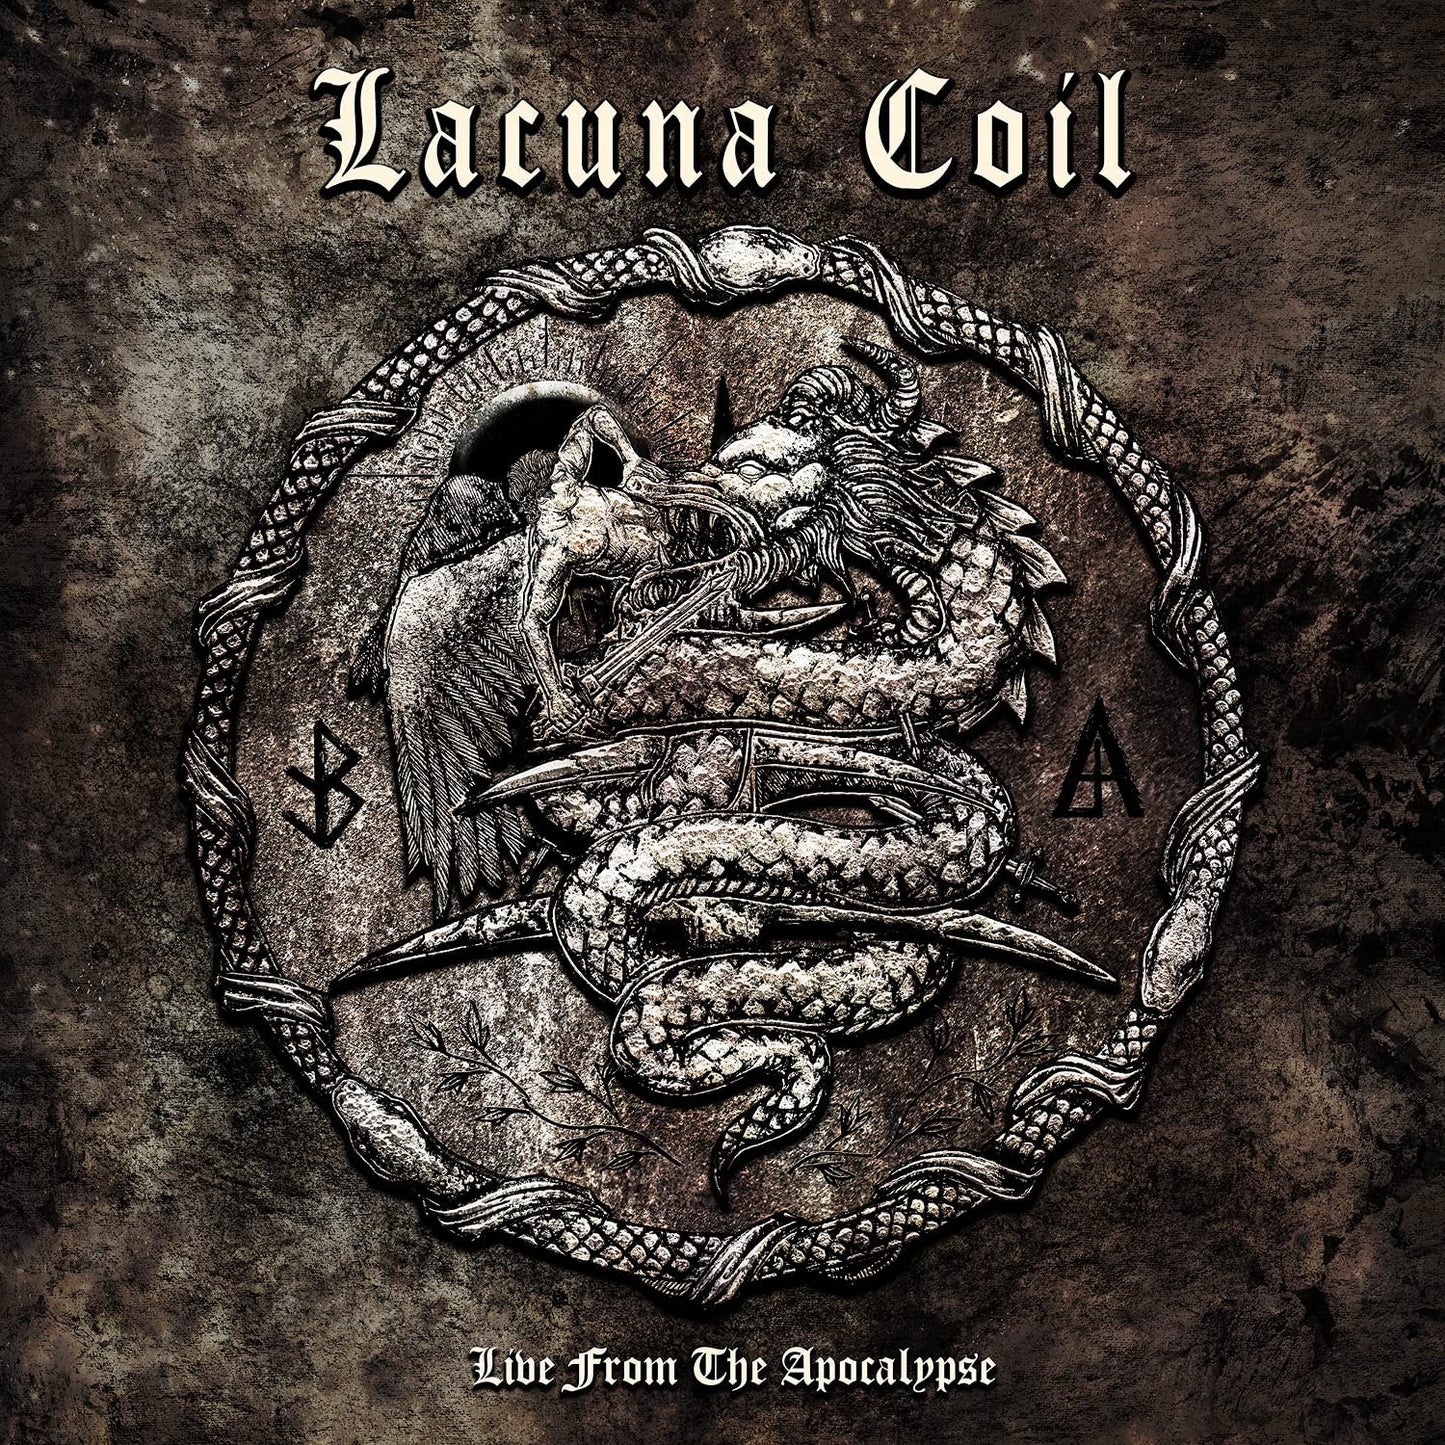 Lacuna Coil – Live From The Apocalypse